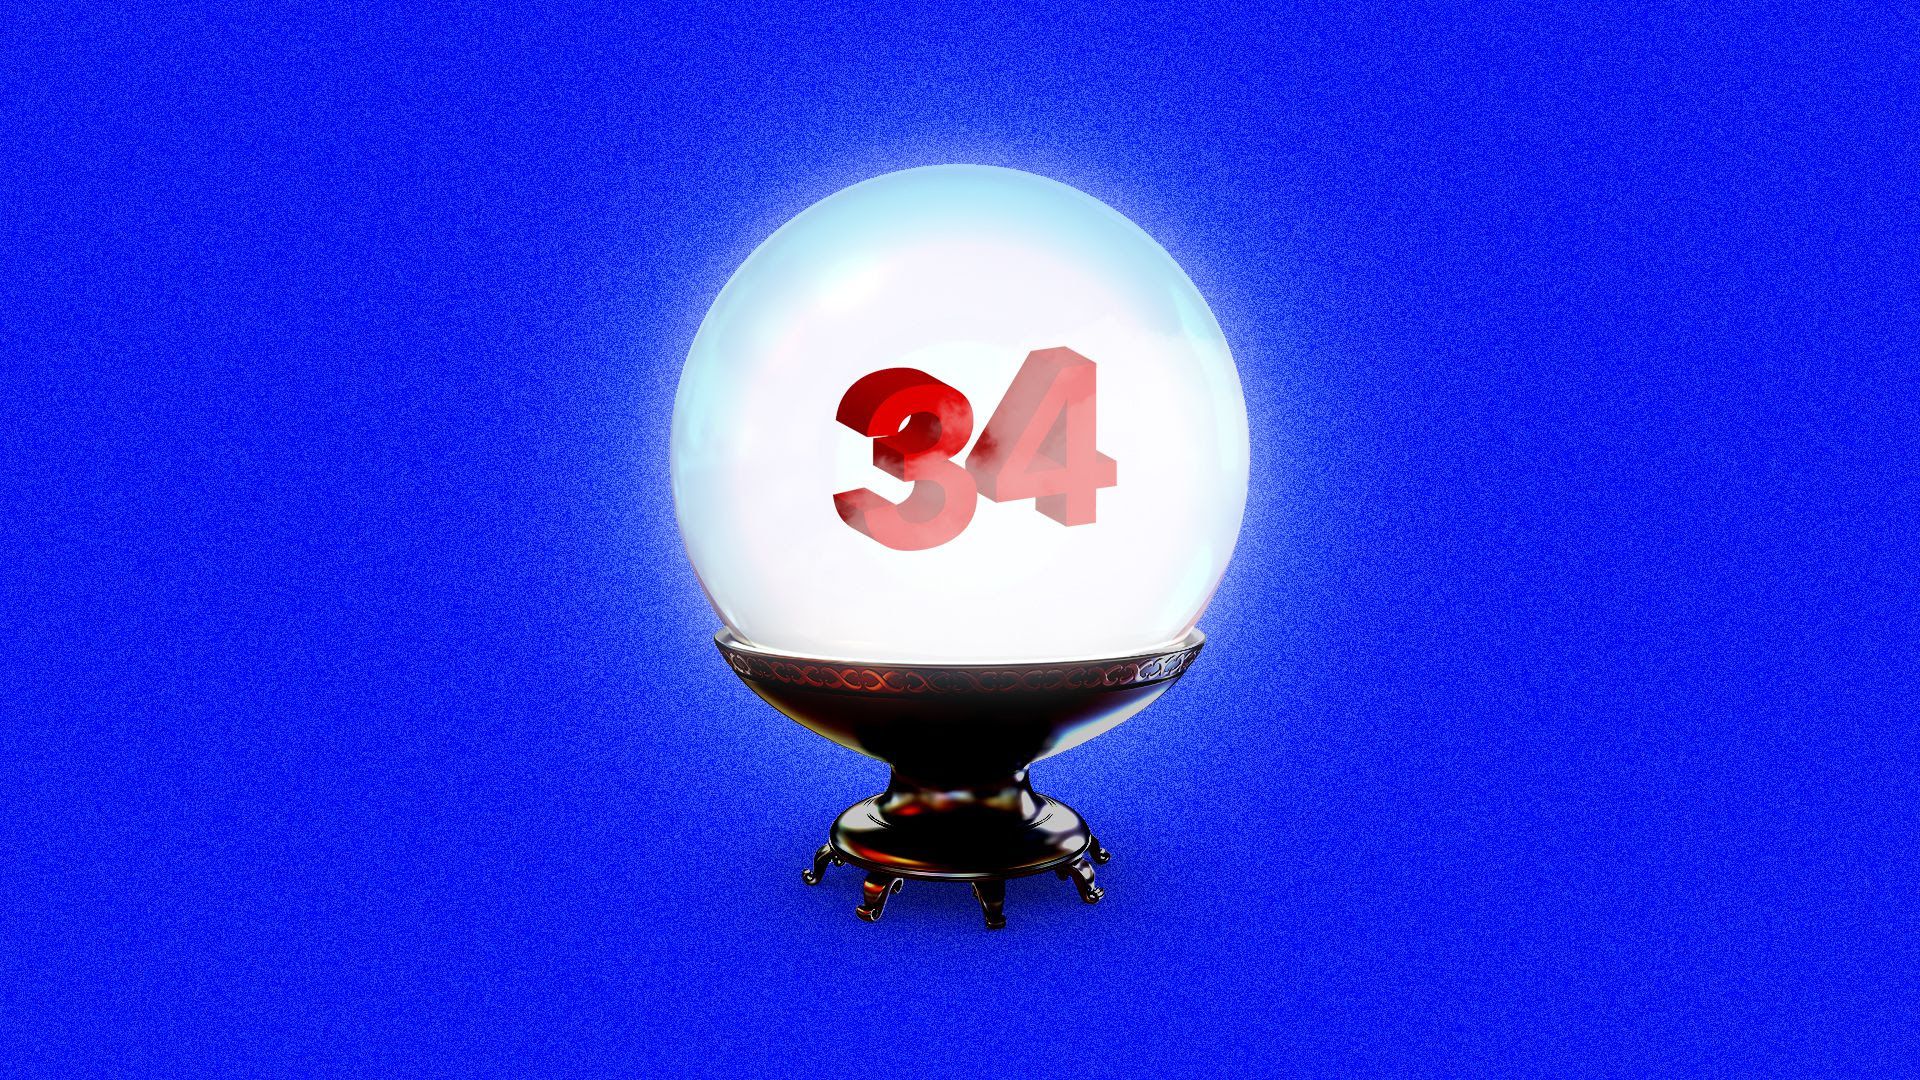 A magic ball showing the number 34.